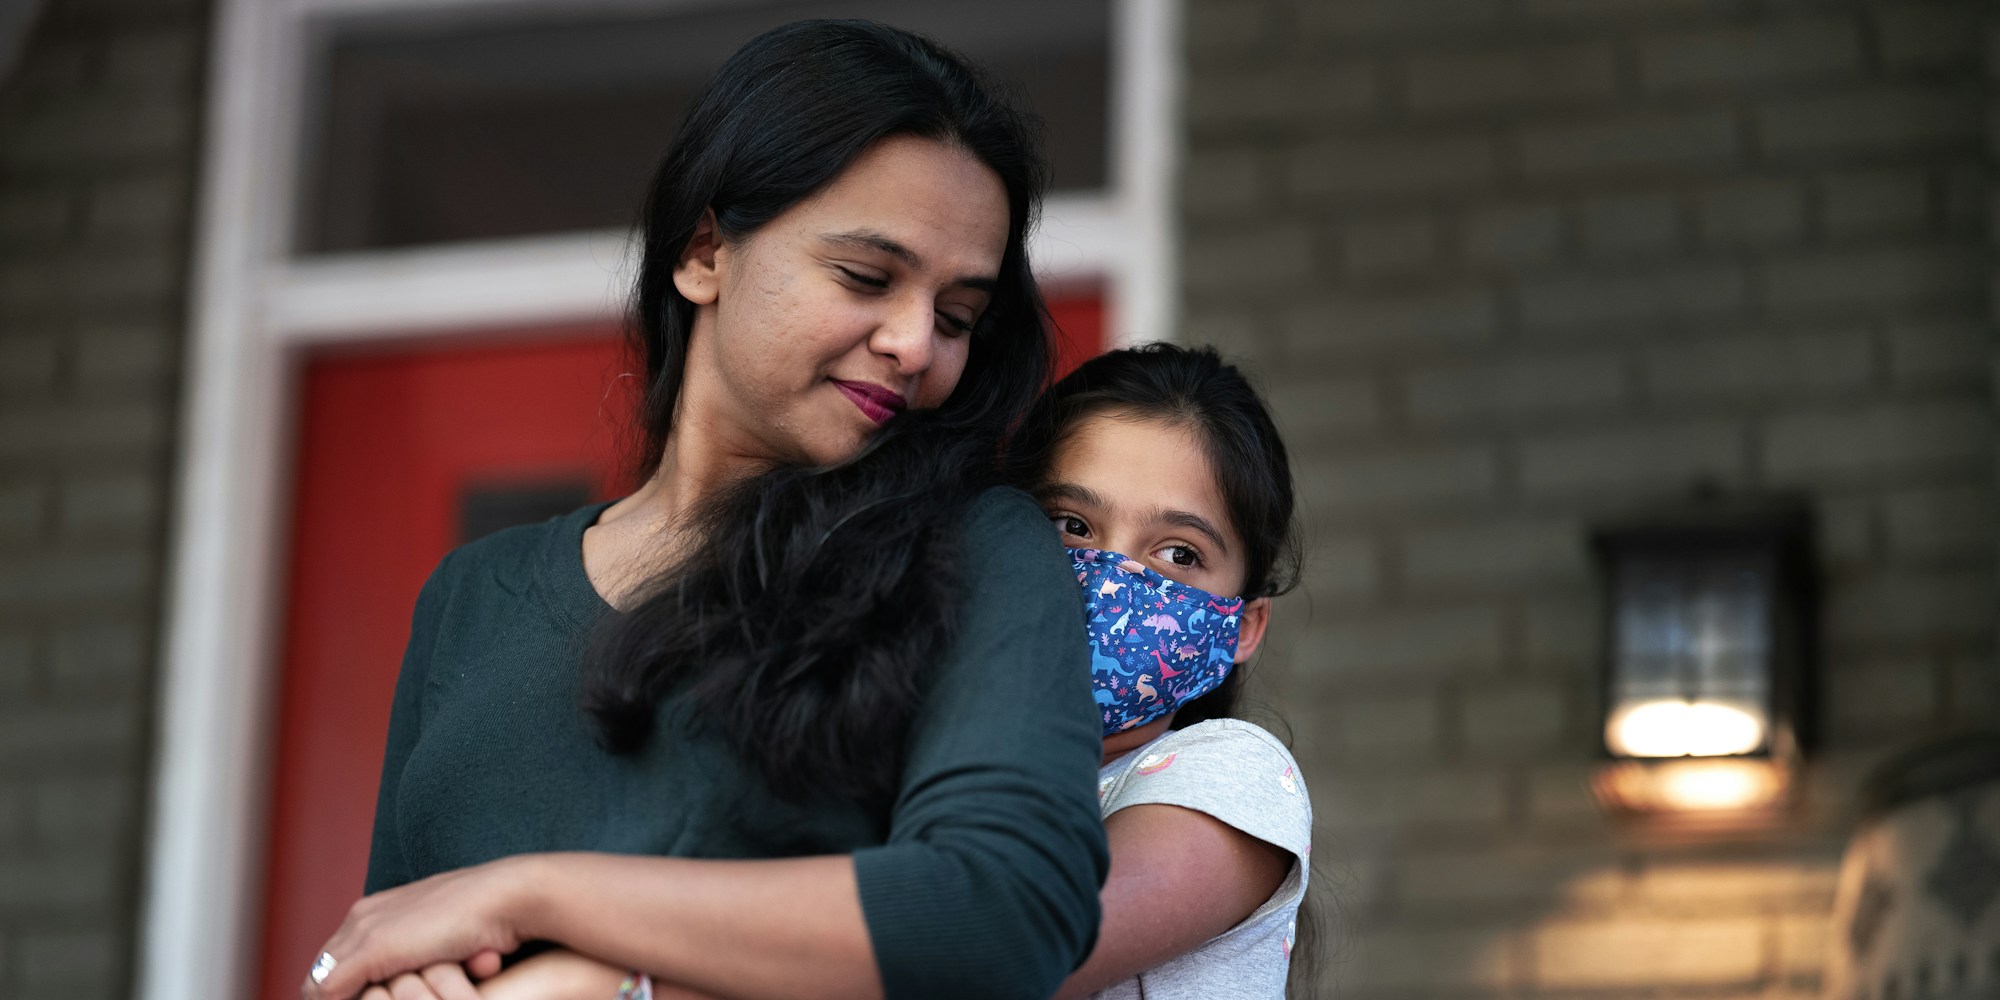 Kavitha Kasargod-Staub is embraced by her 10-year-old daughter on the front porch of their home in Washington, D.C., on October 19, 2021.